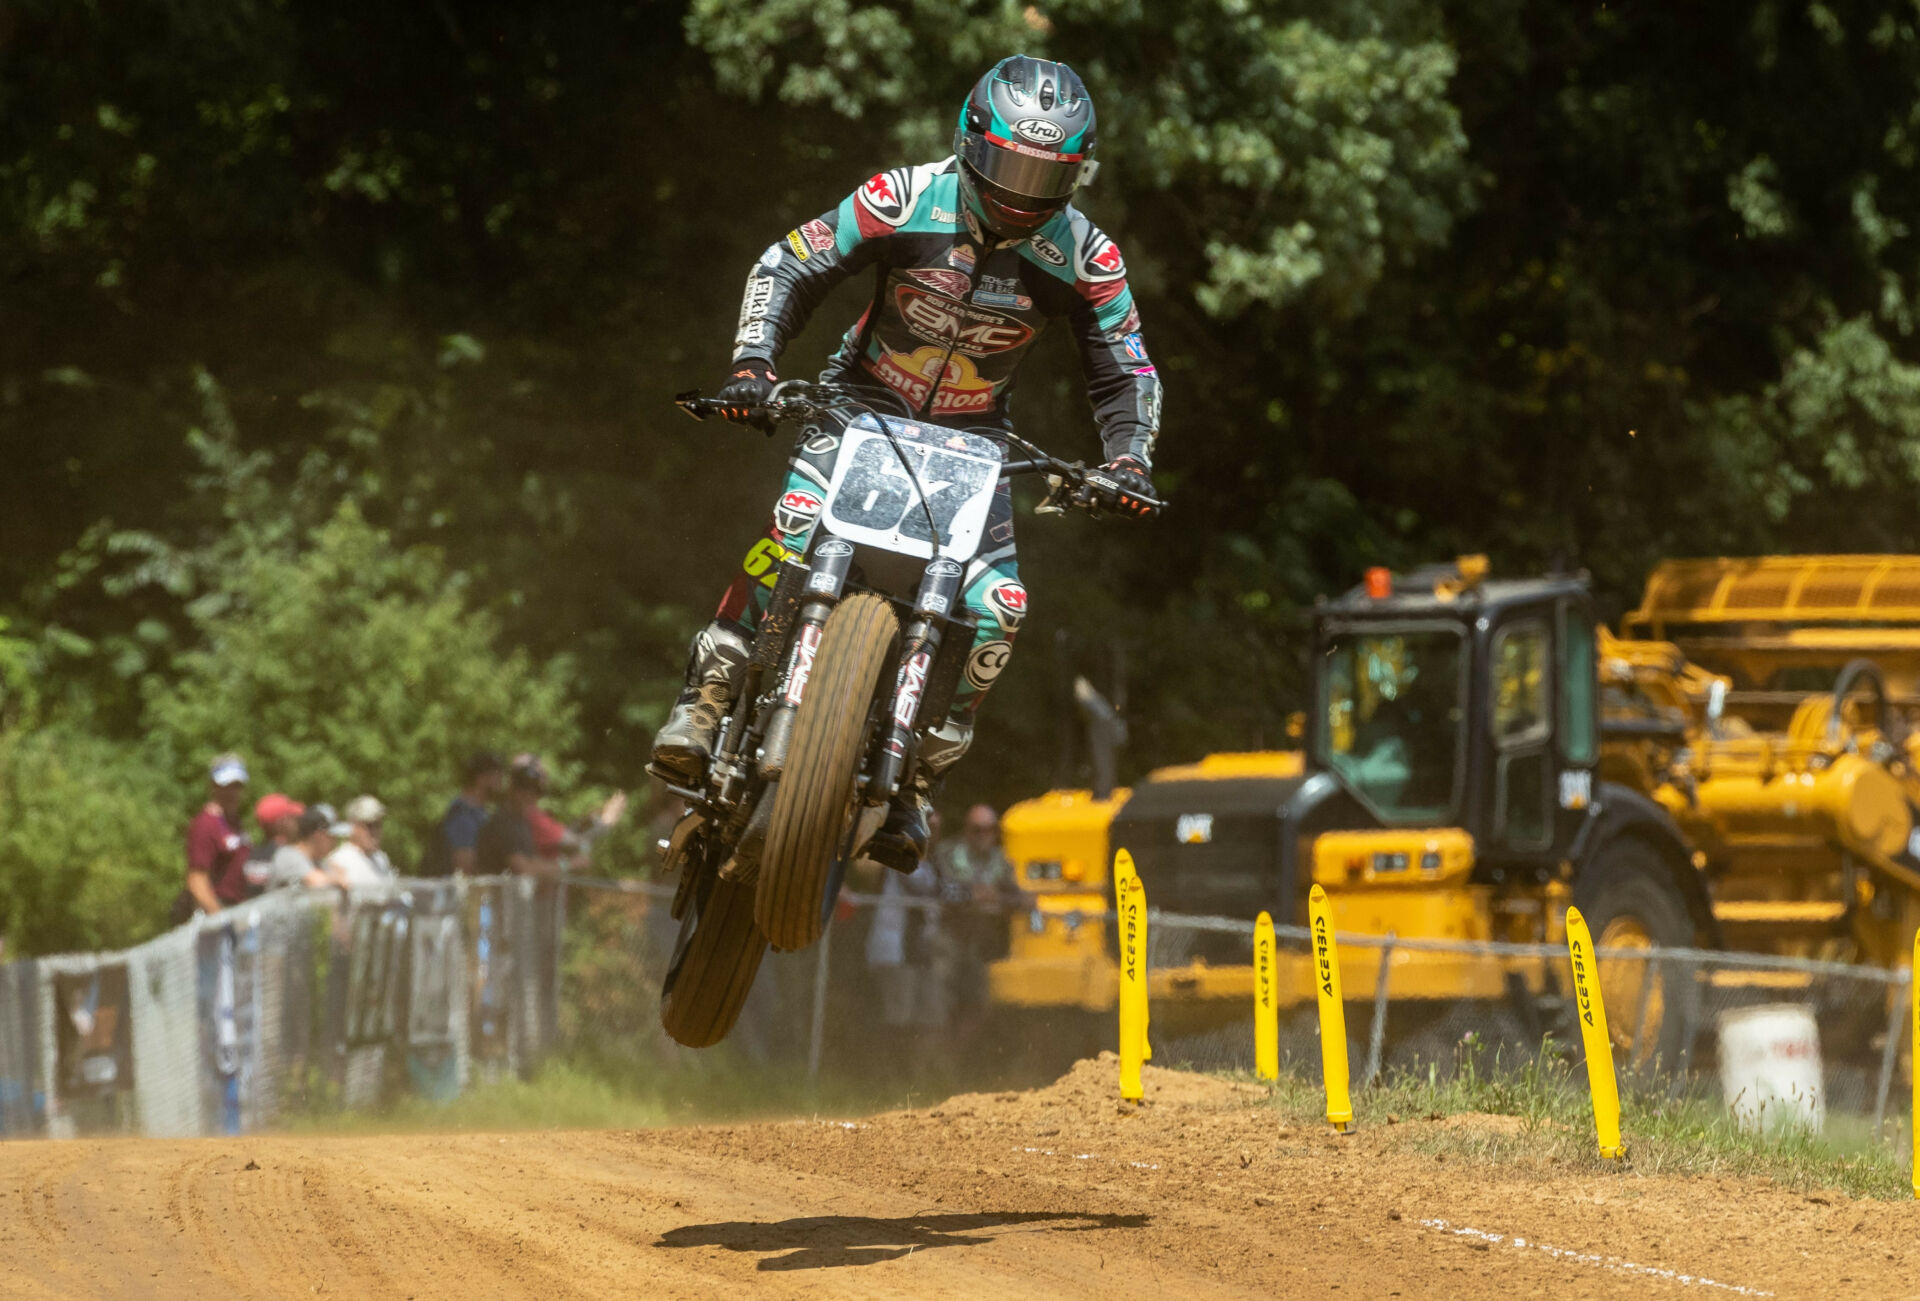 Davis Fisher (67) at the Peoria TT in 2022. Photo by Tim Lester, courtesy AFT.